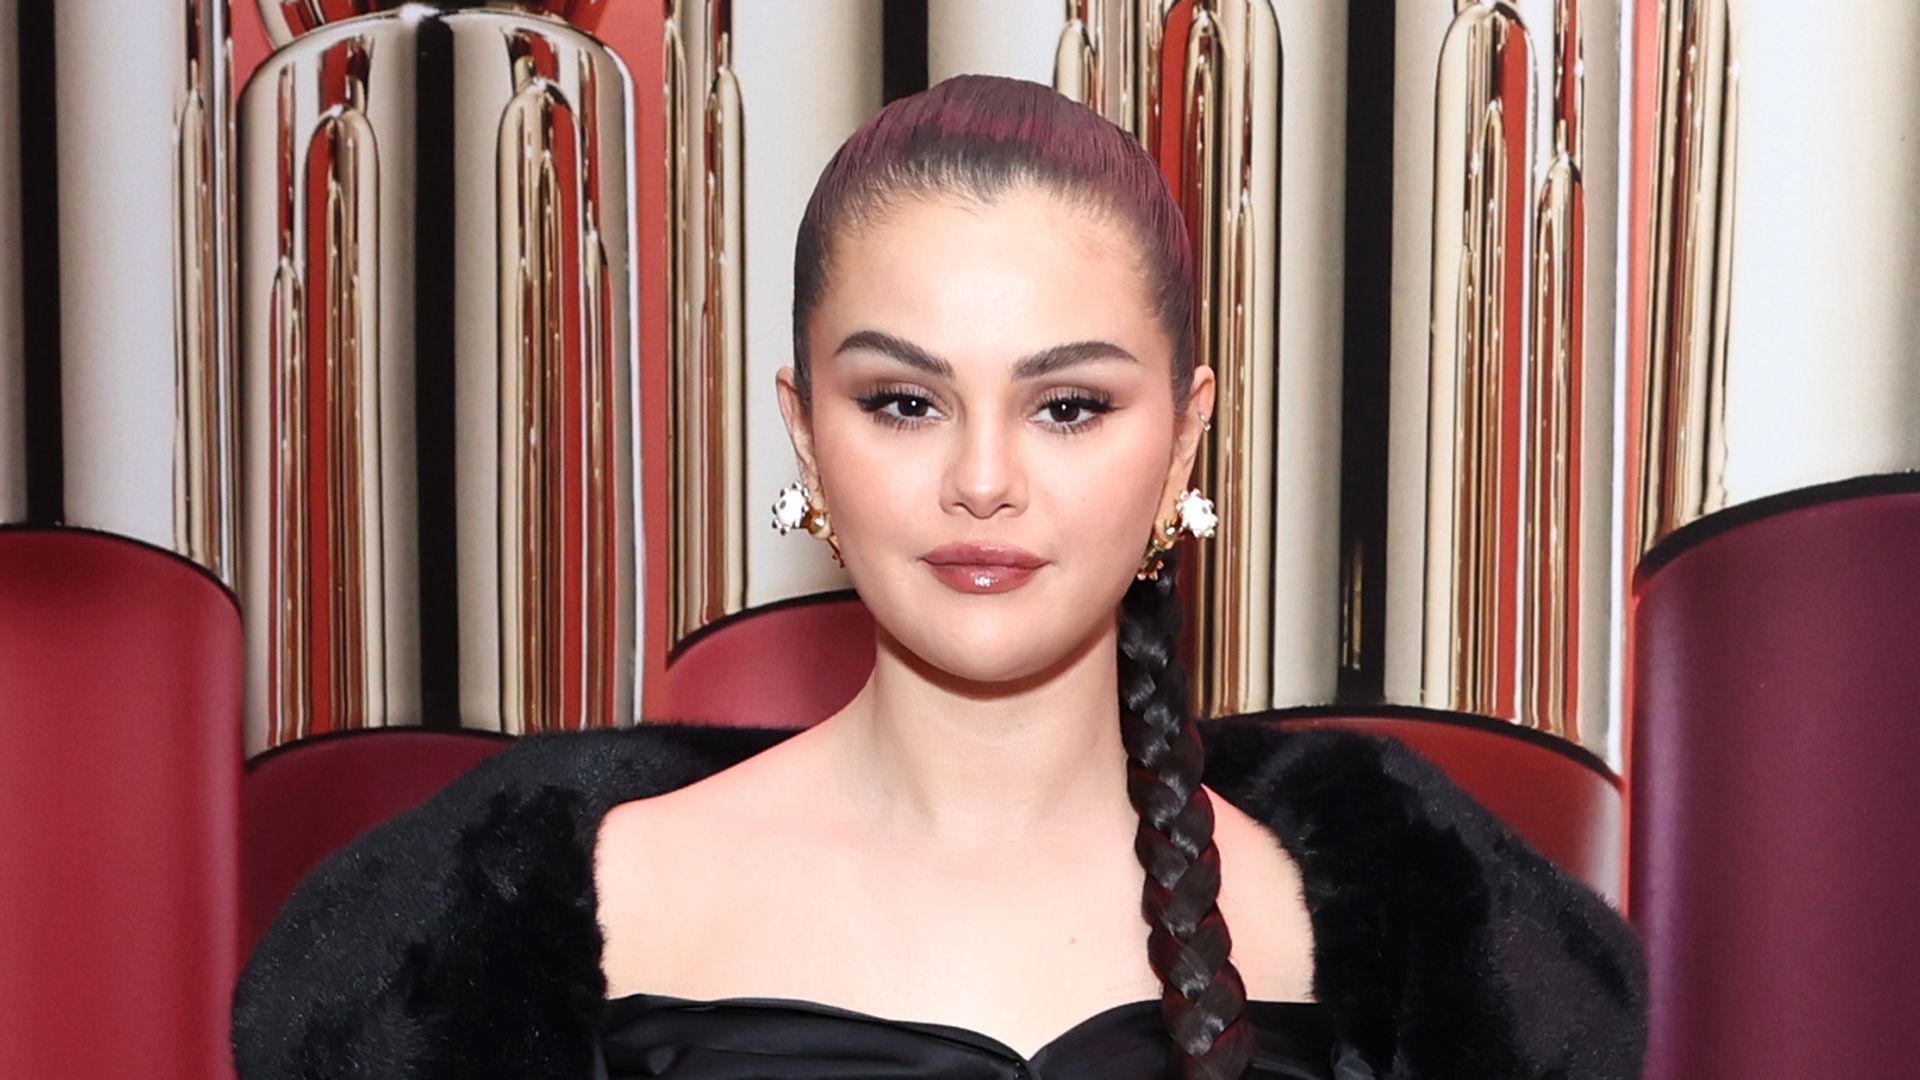 Selena Gomez's style: From Wizards of Waverly Place to Rare Beauty